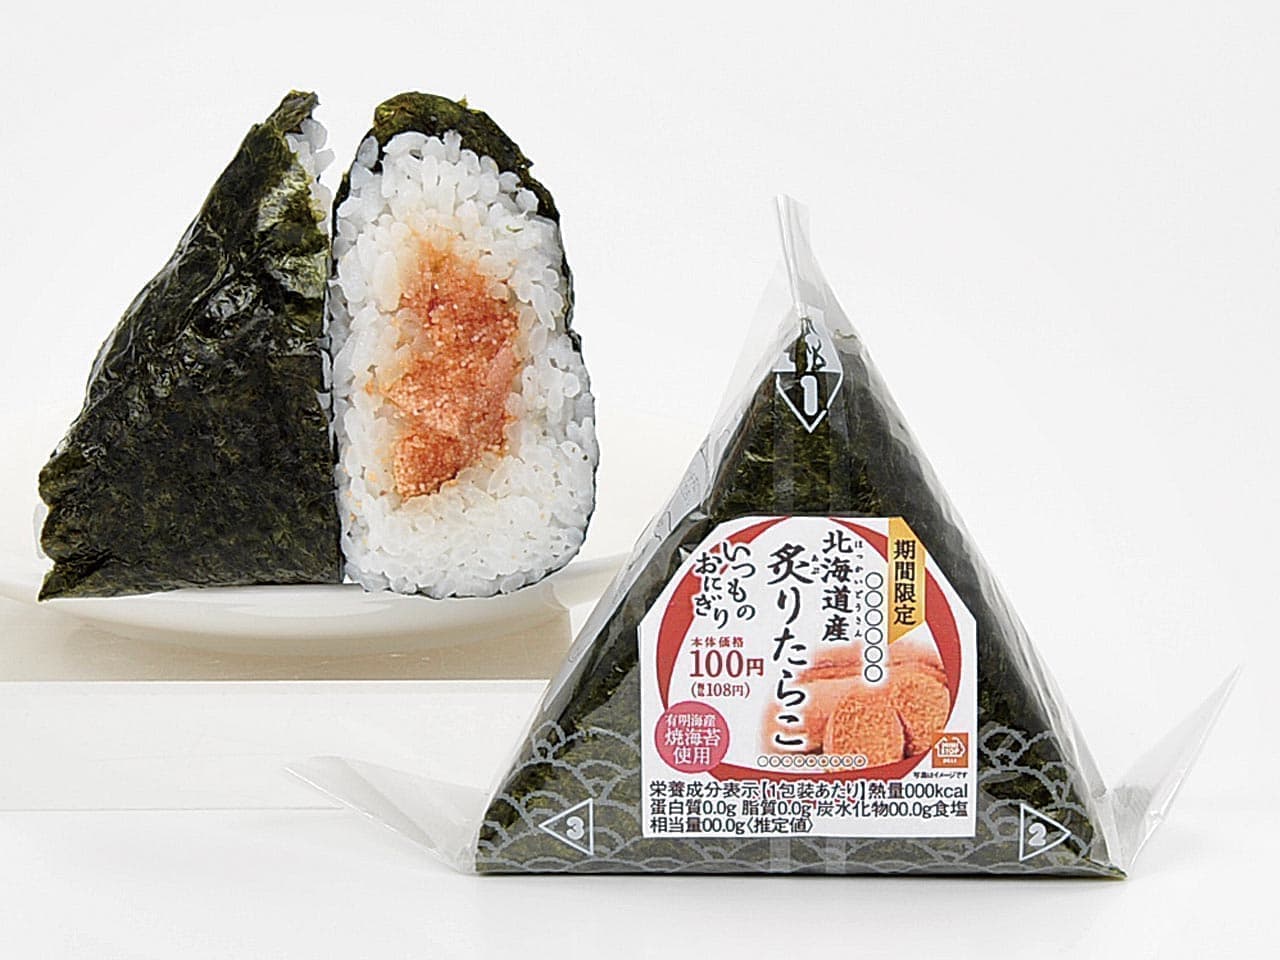 New rice ball "Hand-rolled cod roe from Hokkaido" at Ministop